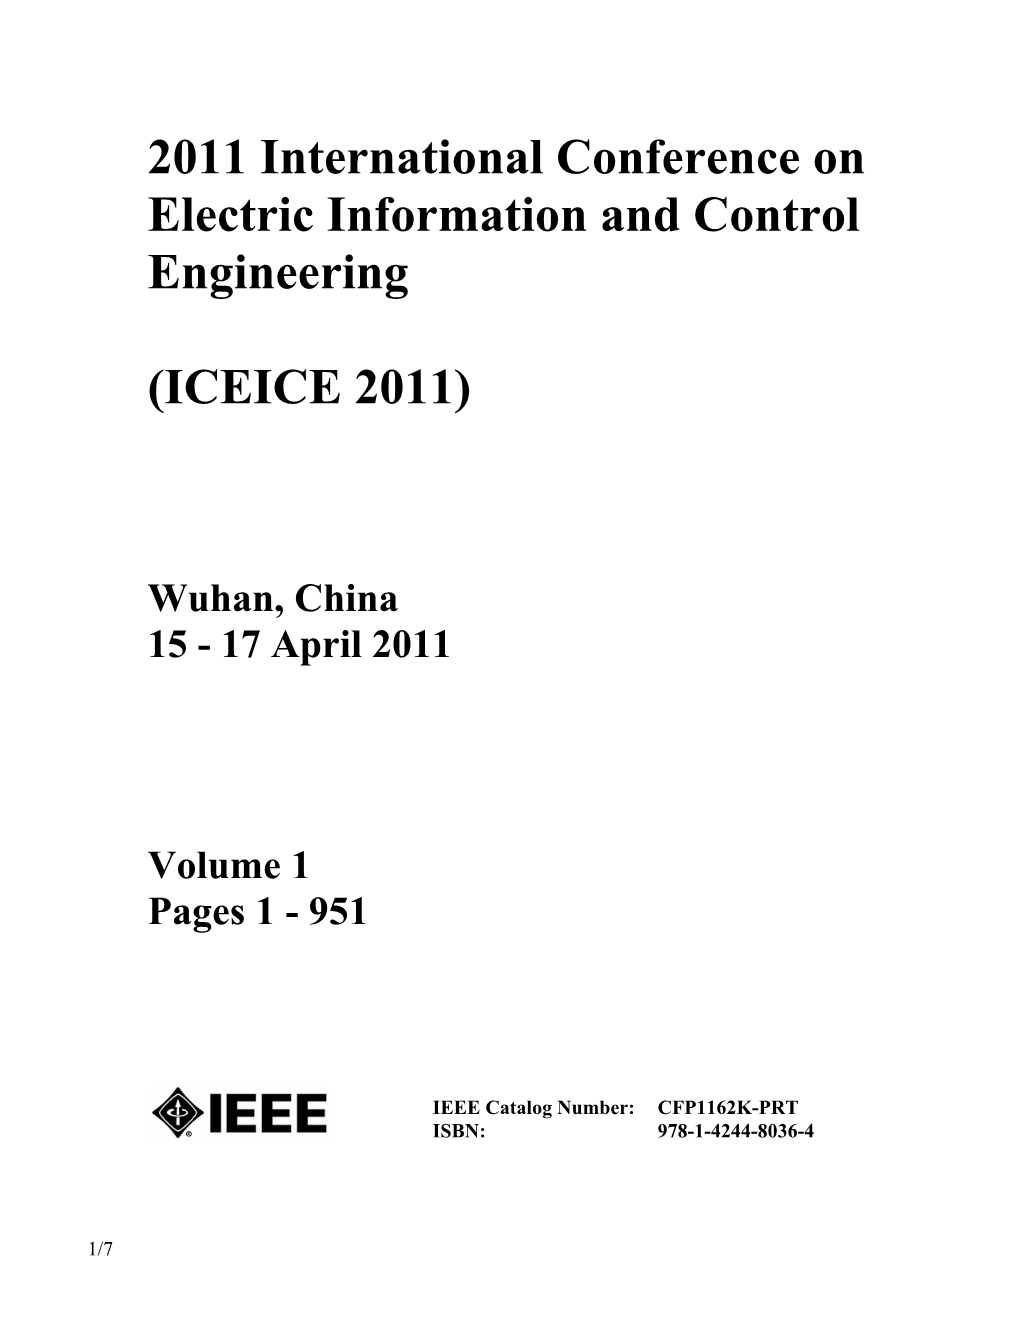 2011 International Conference on Electric Information and Control Engineering